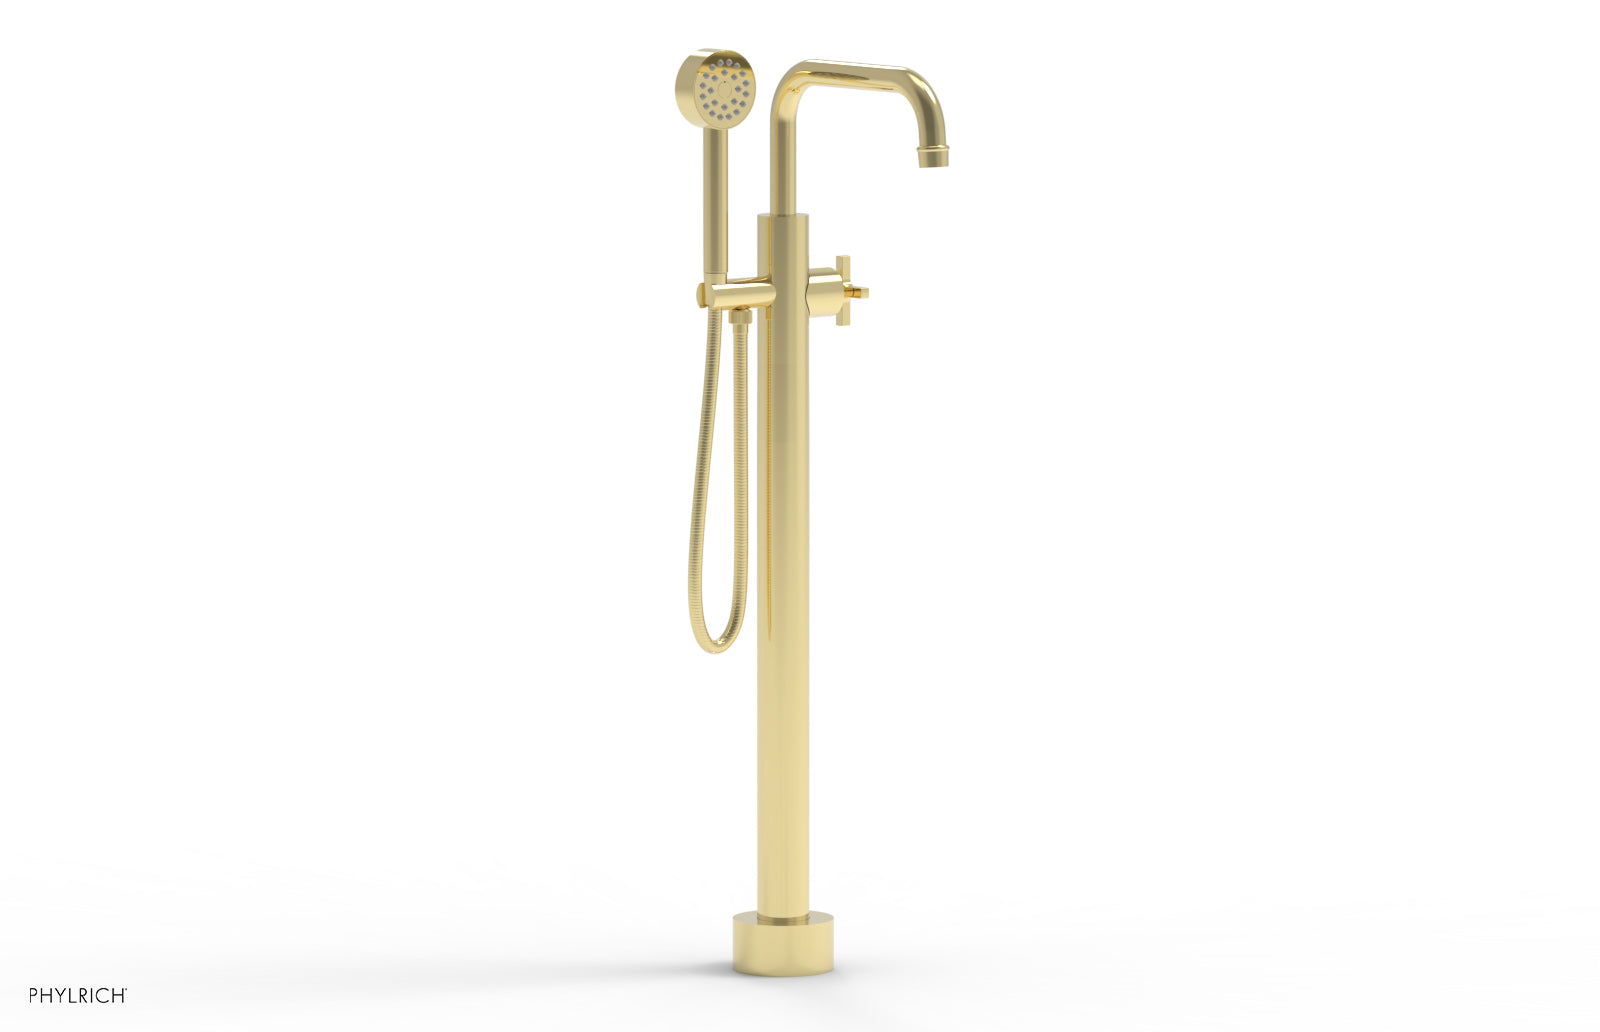 Phylrich HEX MODERN Tall Floor Mount Tub Filler - Cross Handle with Hand Shower